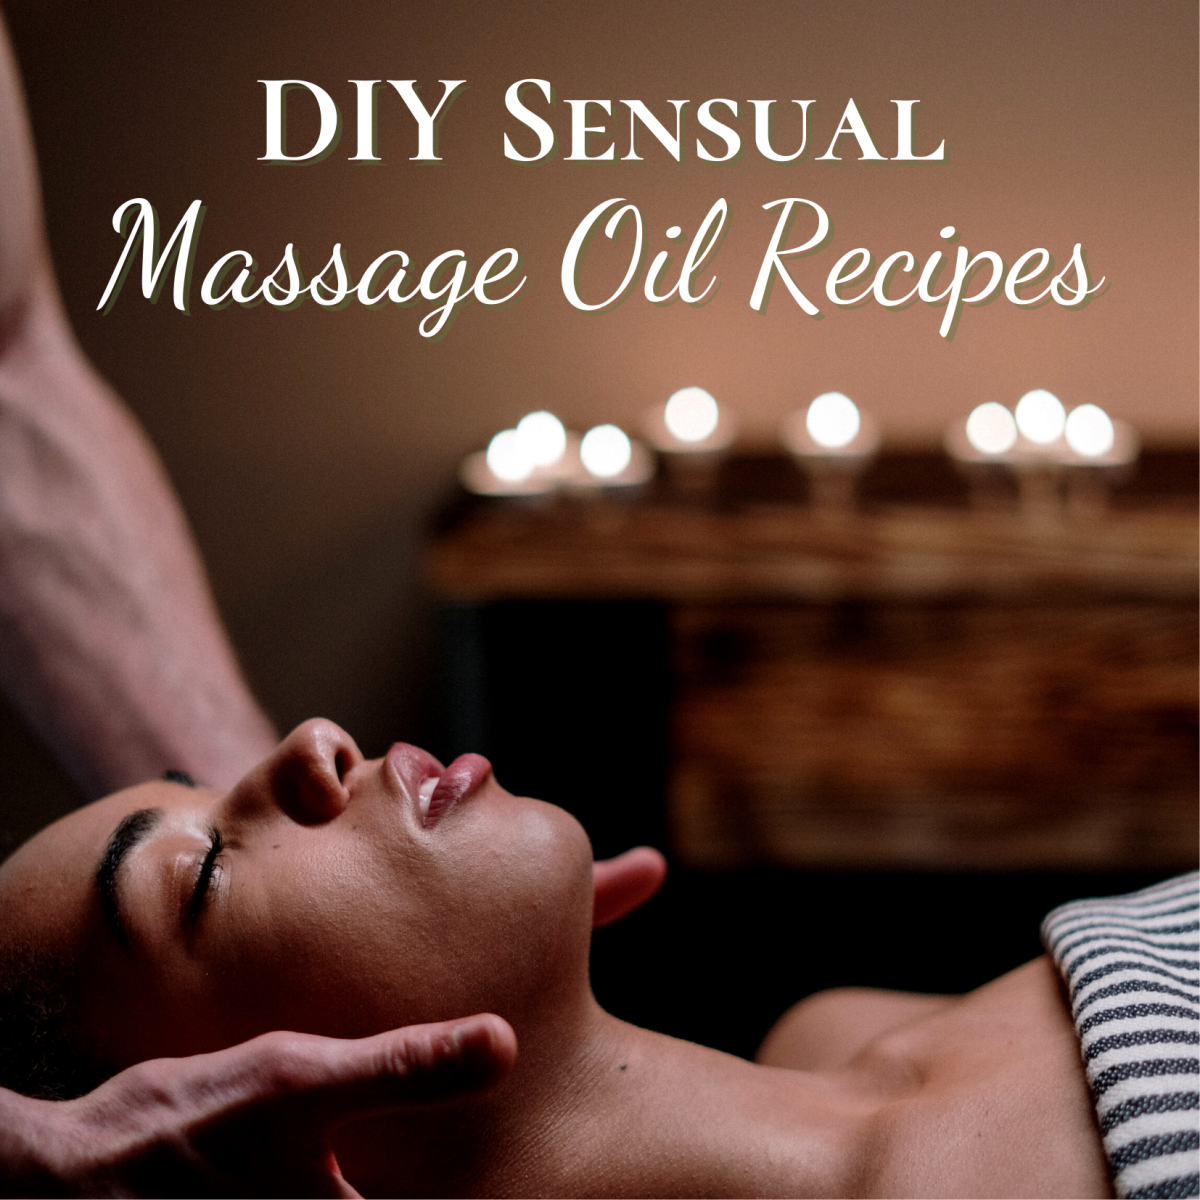 Make your own sensual massage oils with these recipes.